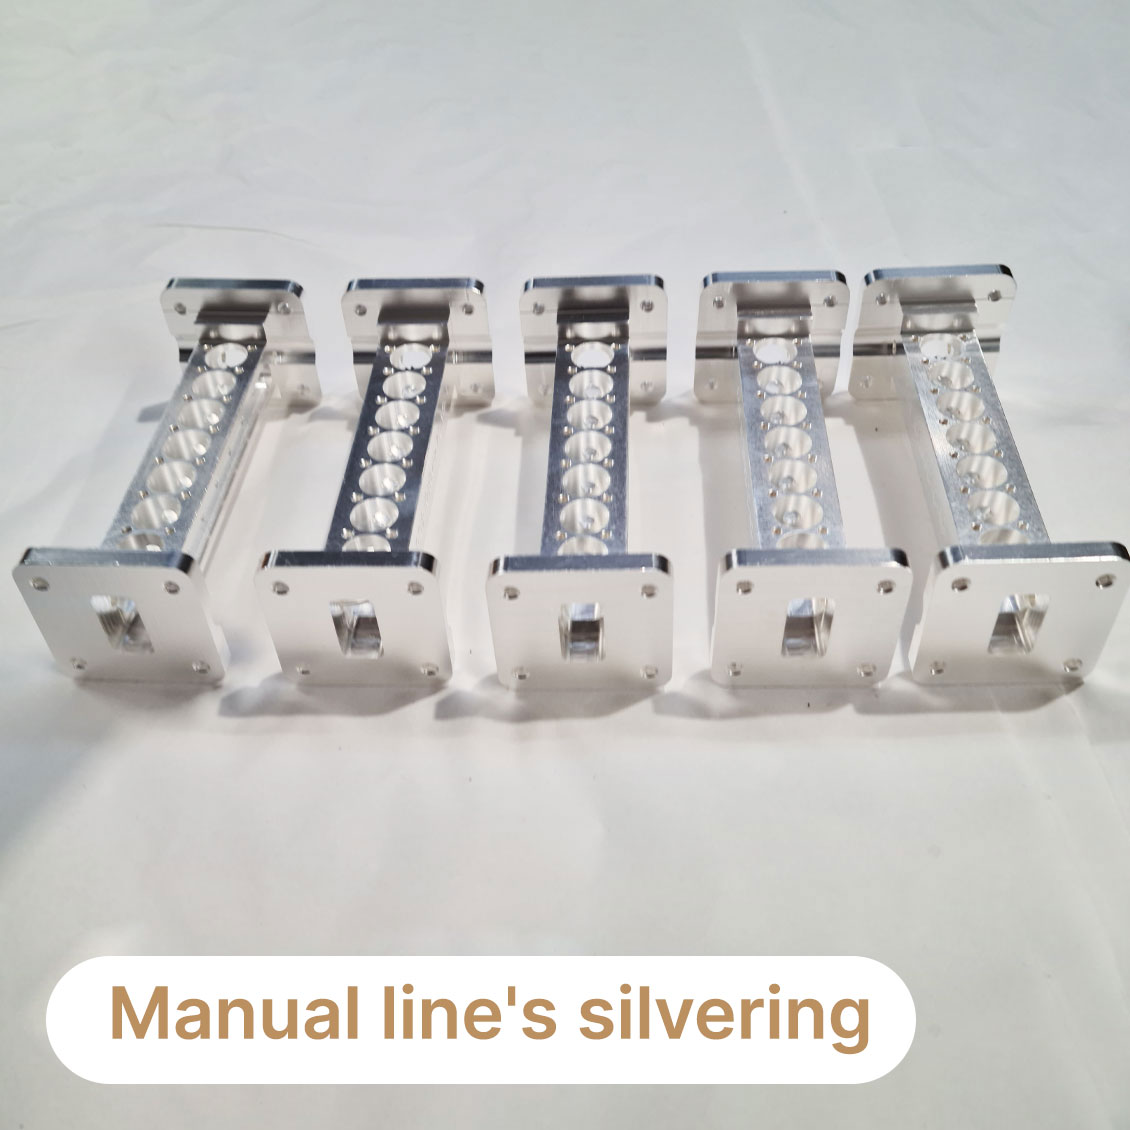 Manual lines silvering